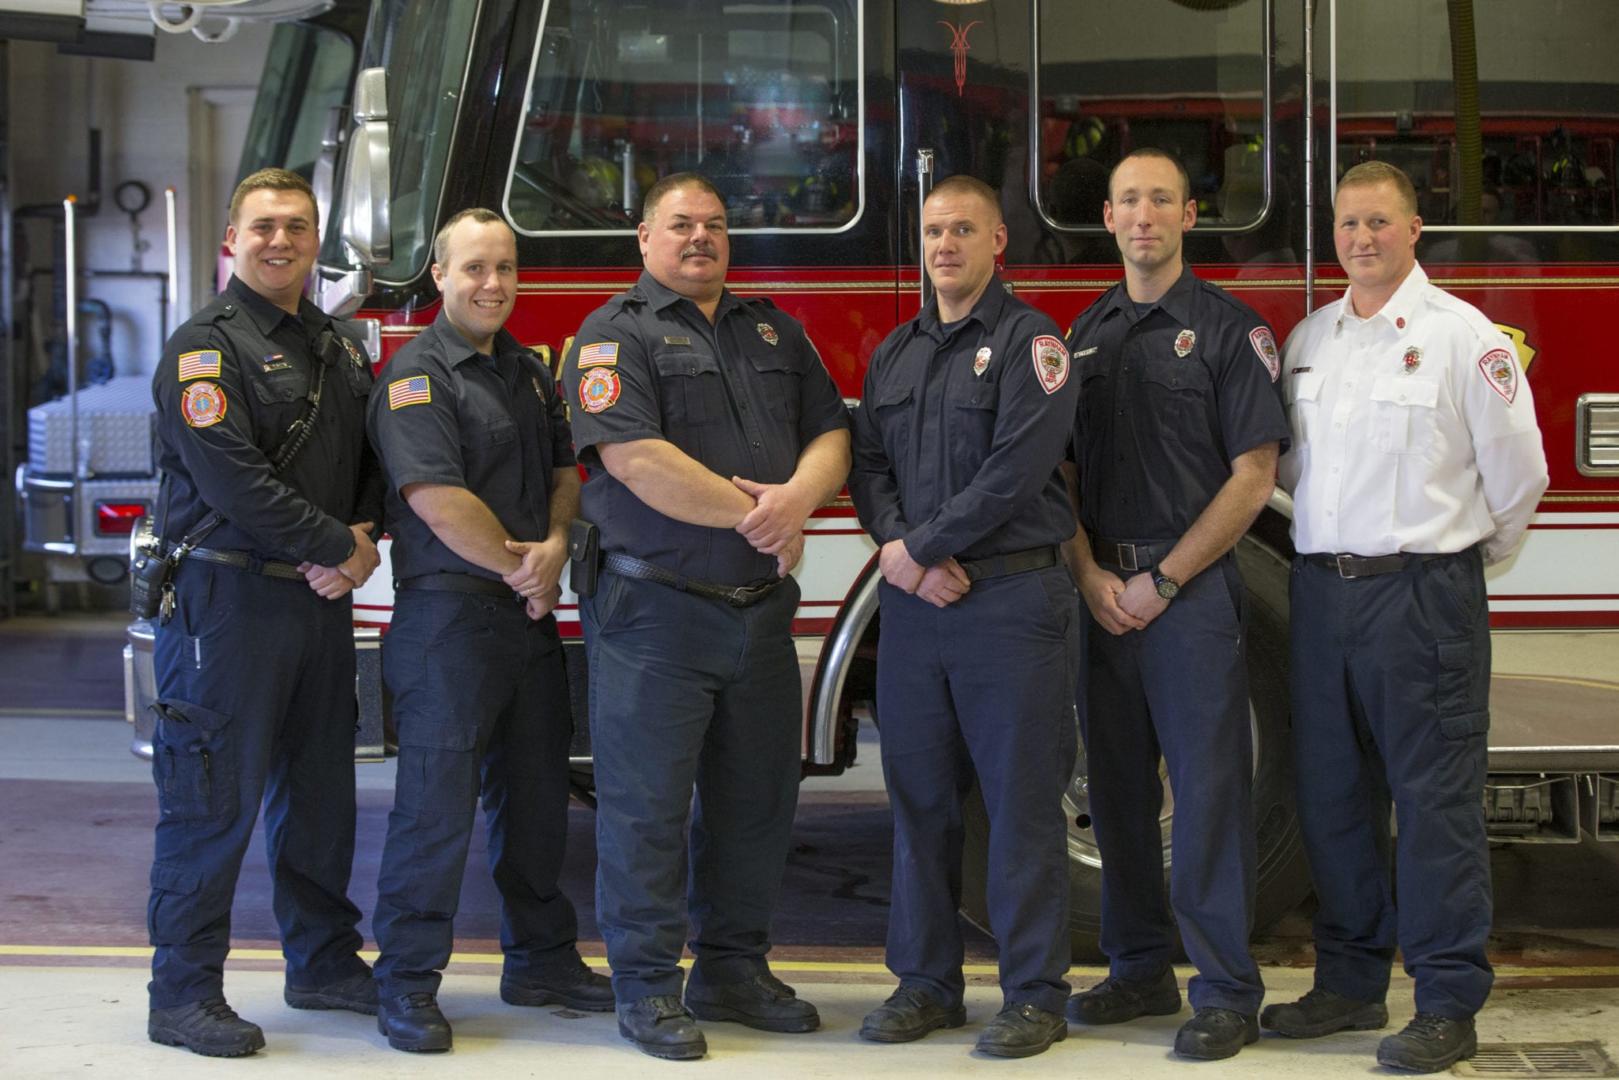 About the Raynham Fire Department